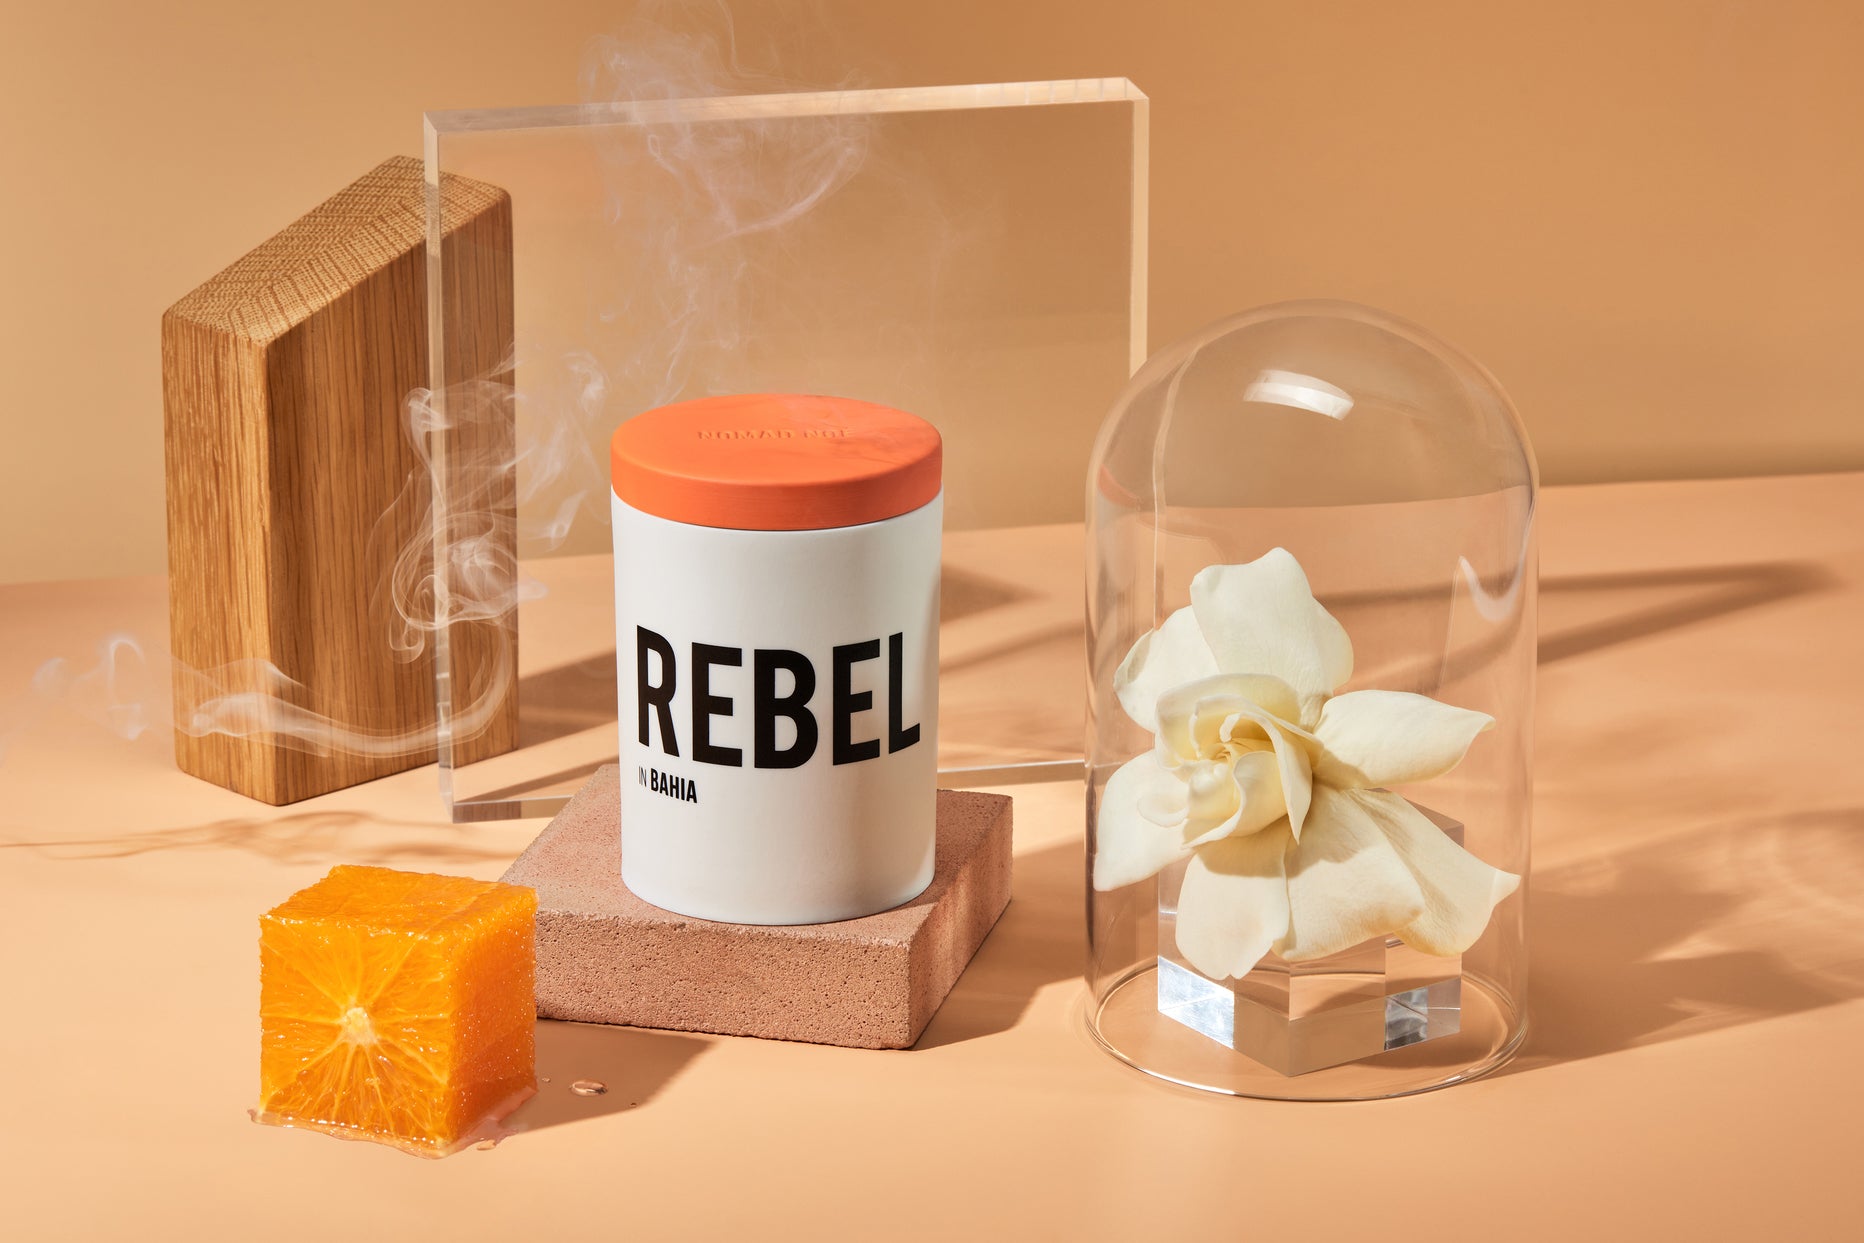 Rebel in Bahia scented candle